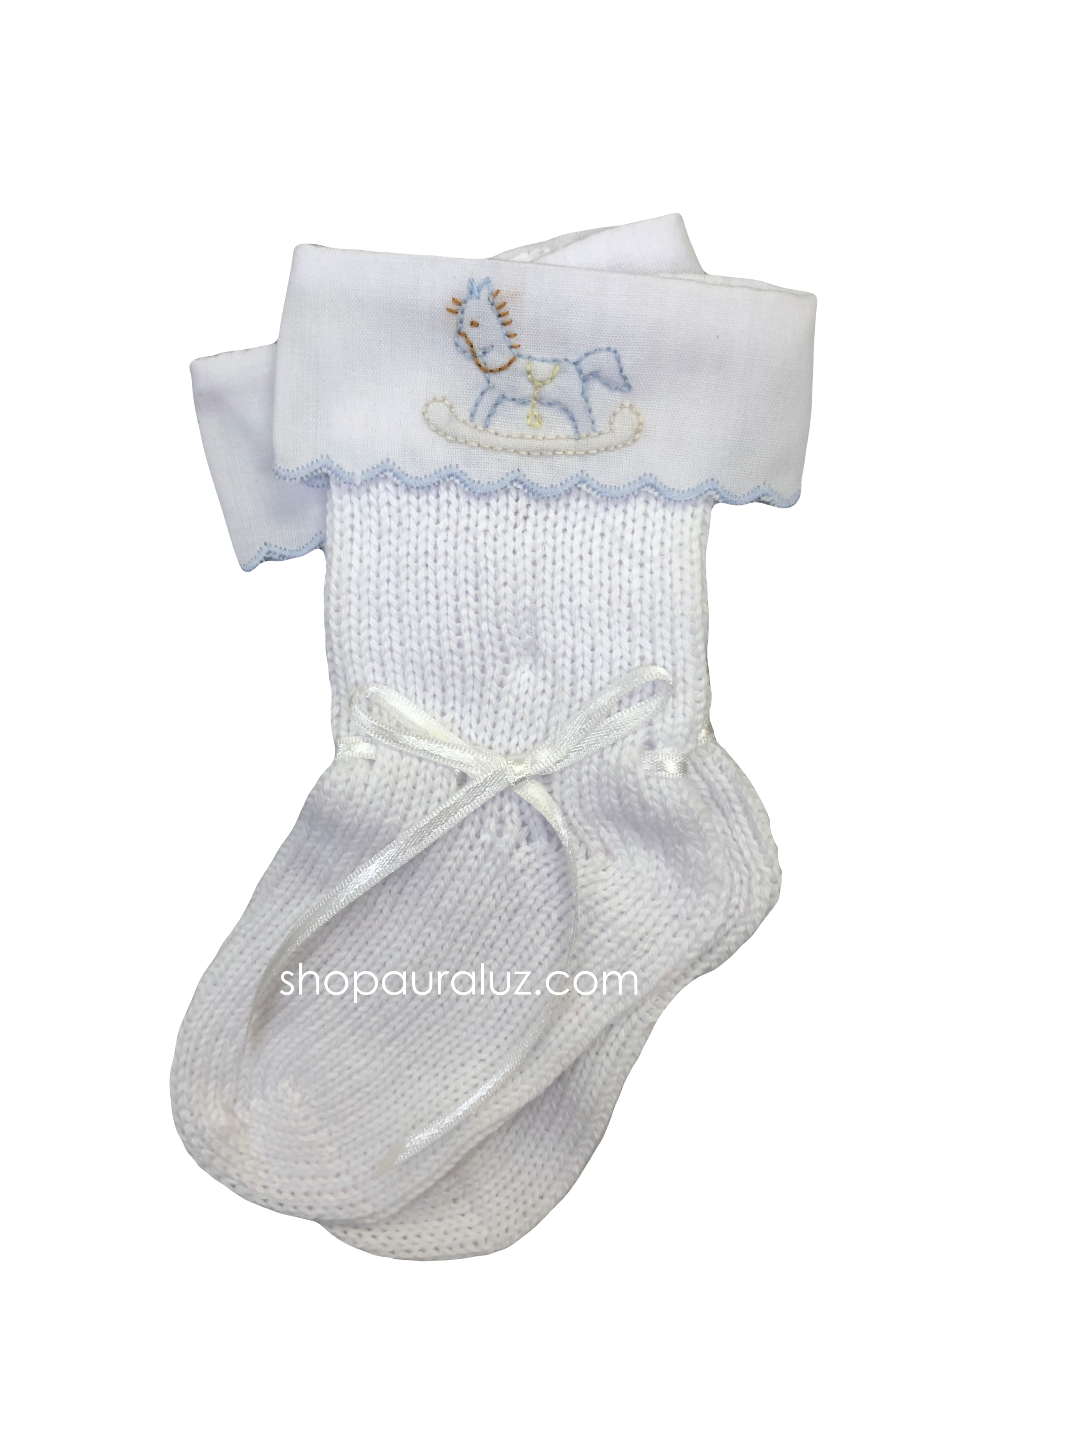 Auraluz Knit Socks...White with blue scallop trim and embroidered rocking horse